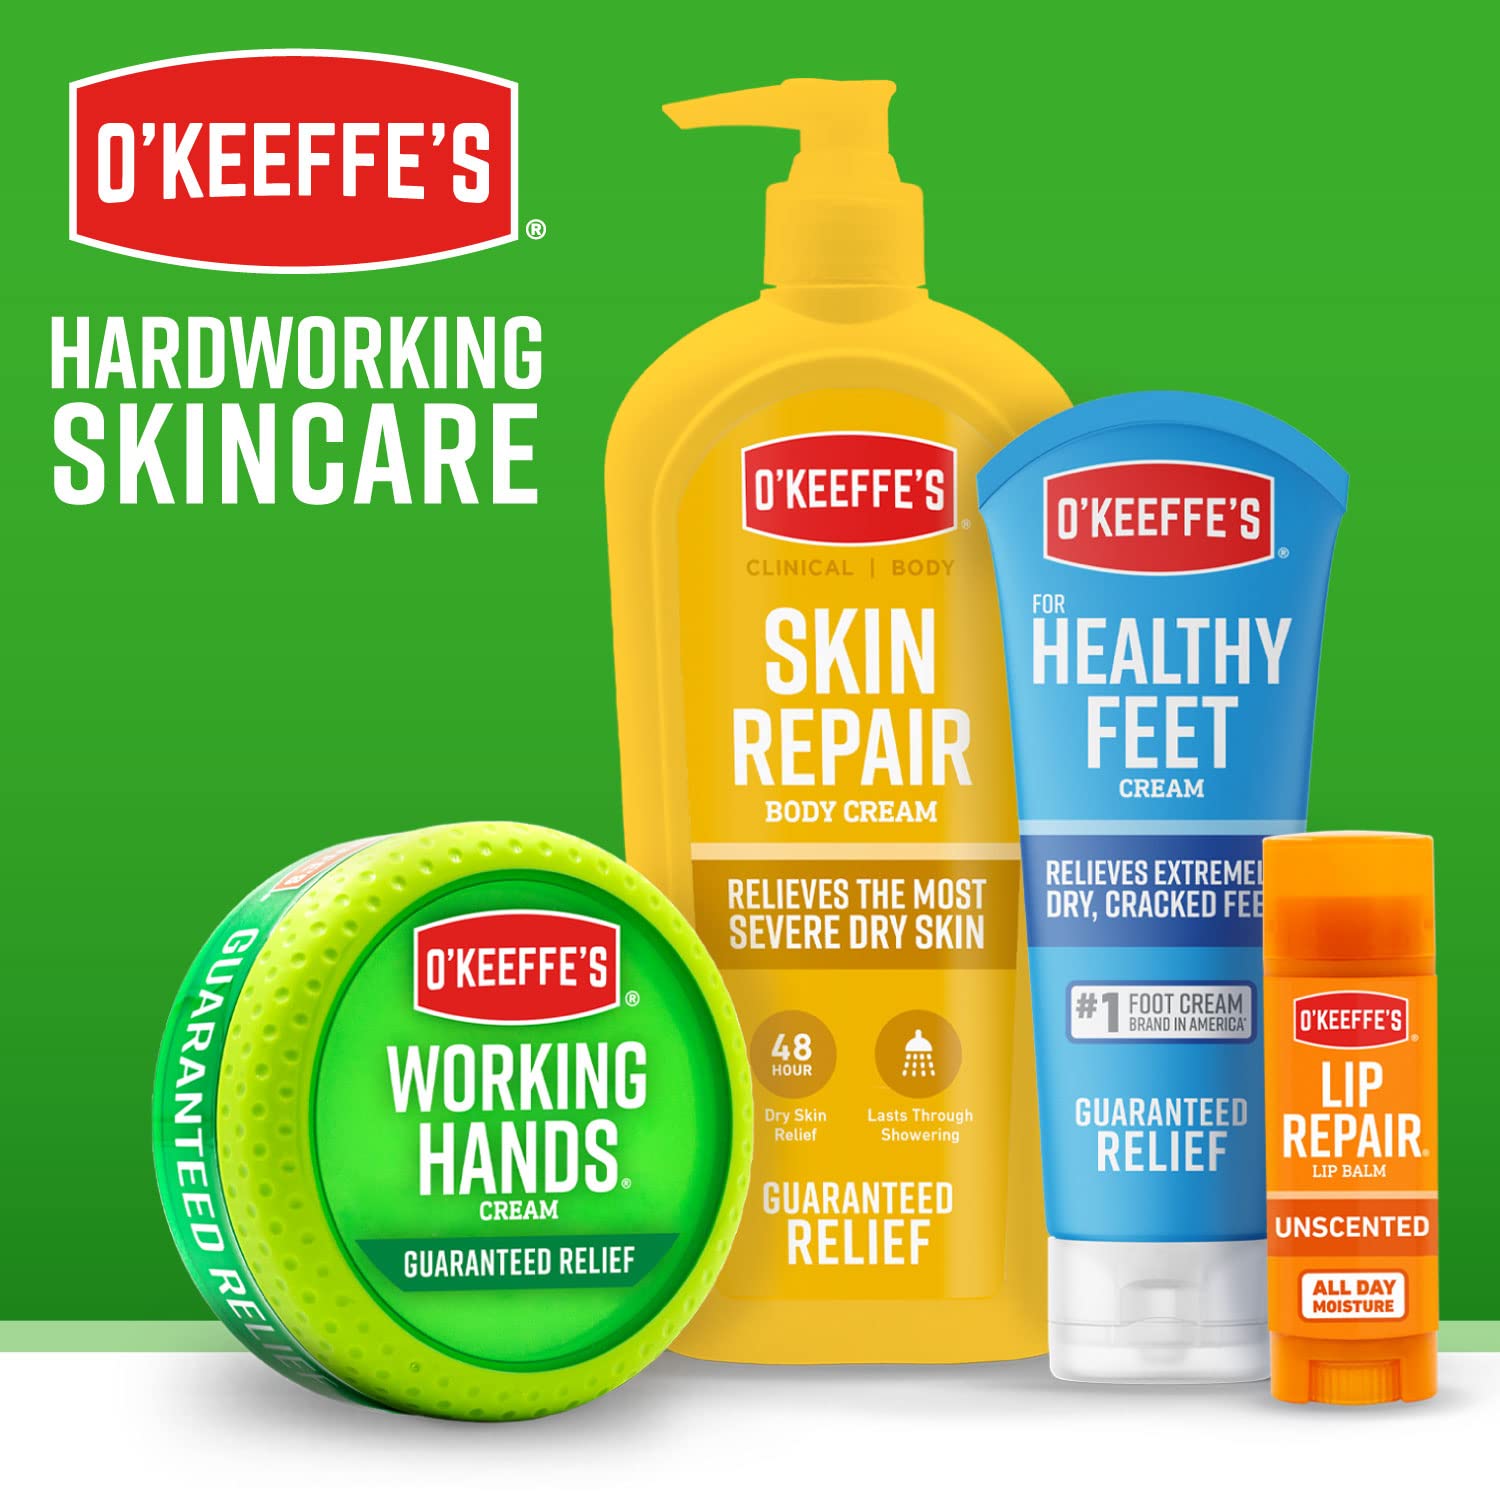 O'Keeffe's Working Hands Hand Cream Value Size, 6.8 oz., Jar (Pack of 1)